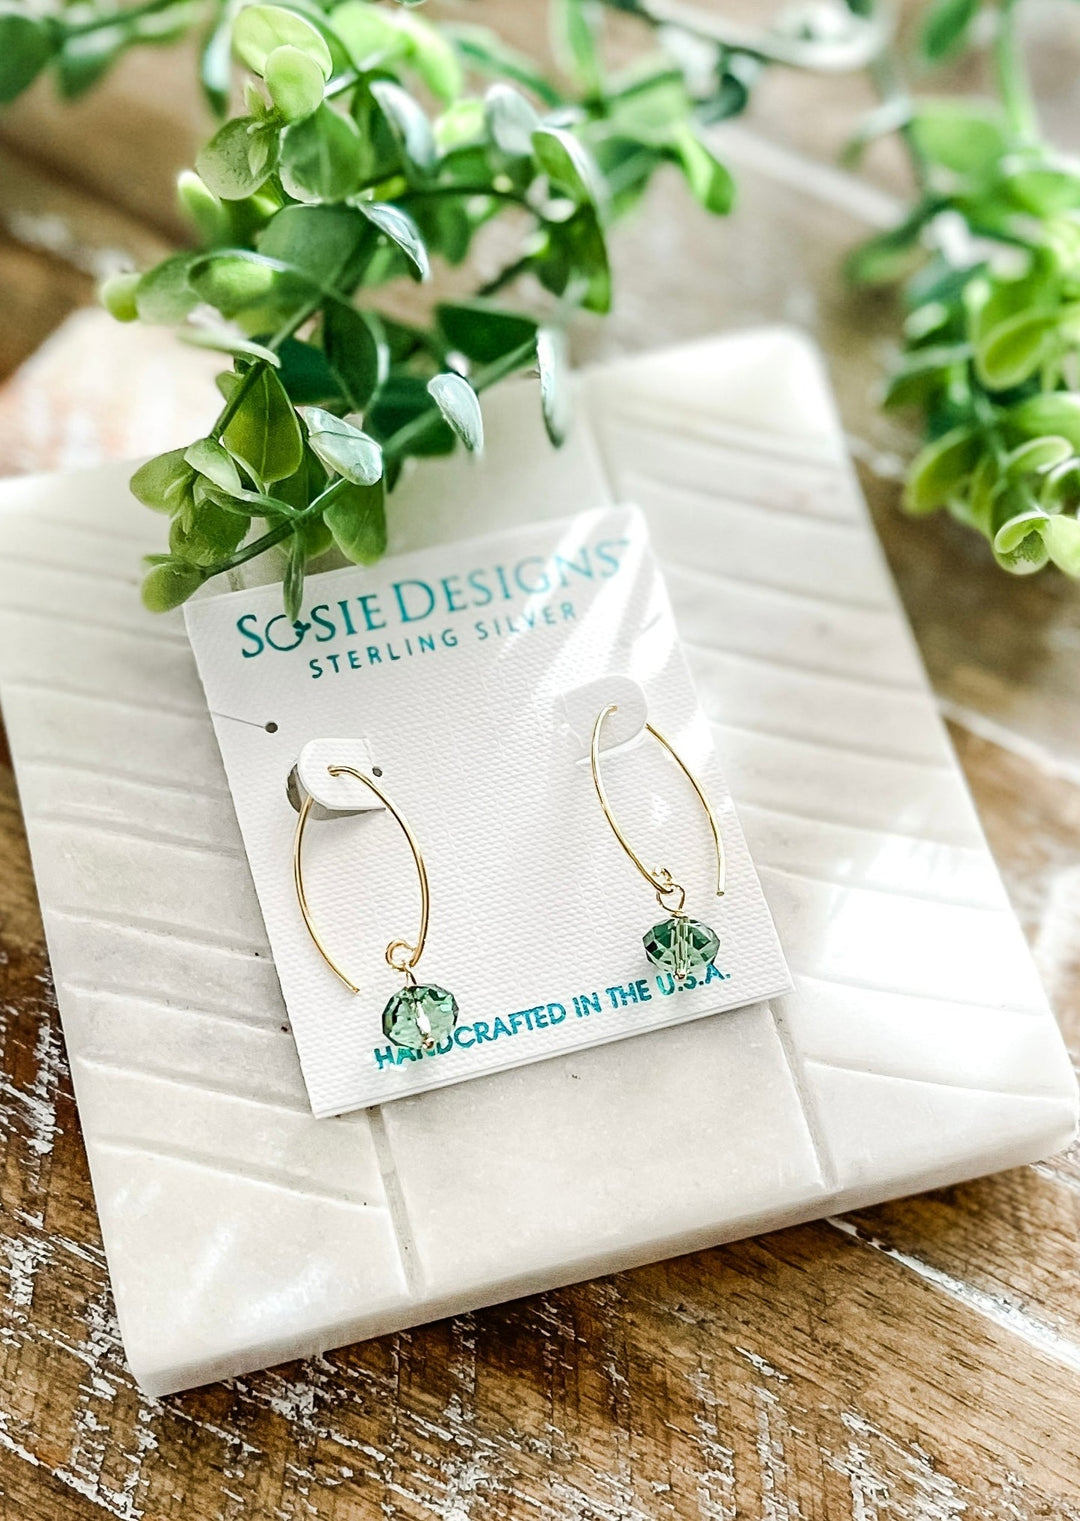 Gold Erinite Earrings | Handcrafted in the United States Earrings | Gold Earrings with green crystals